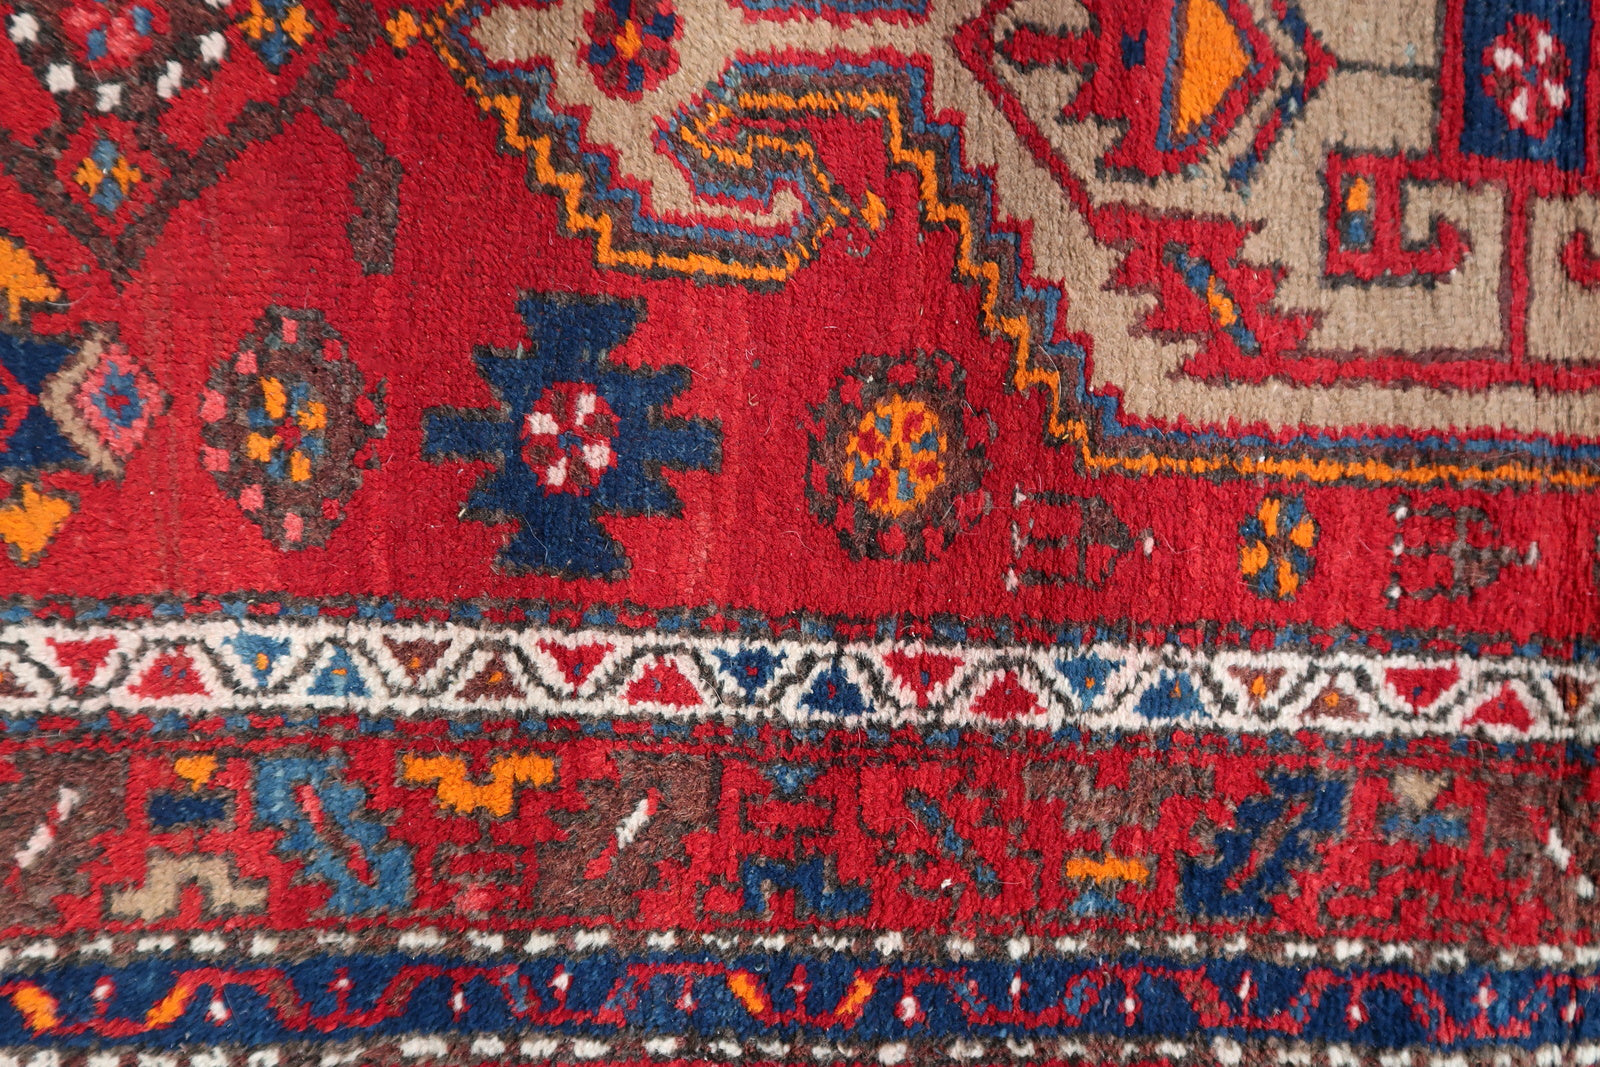 Handmade vintage Persian Hamadan rug in bright red color with large medallion. The rug is from the end of 20th century in original condition, it has some low pile.